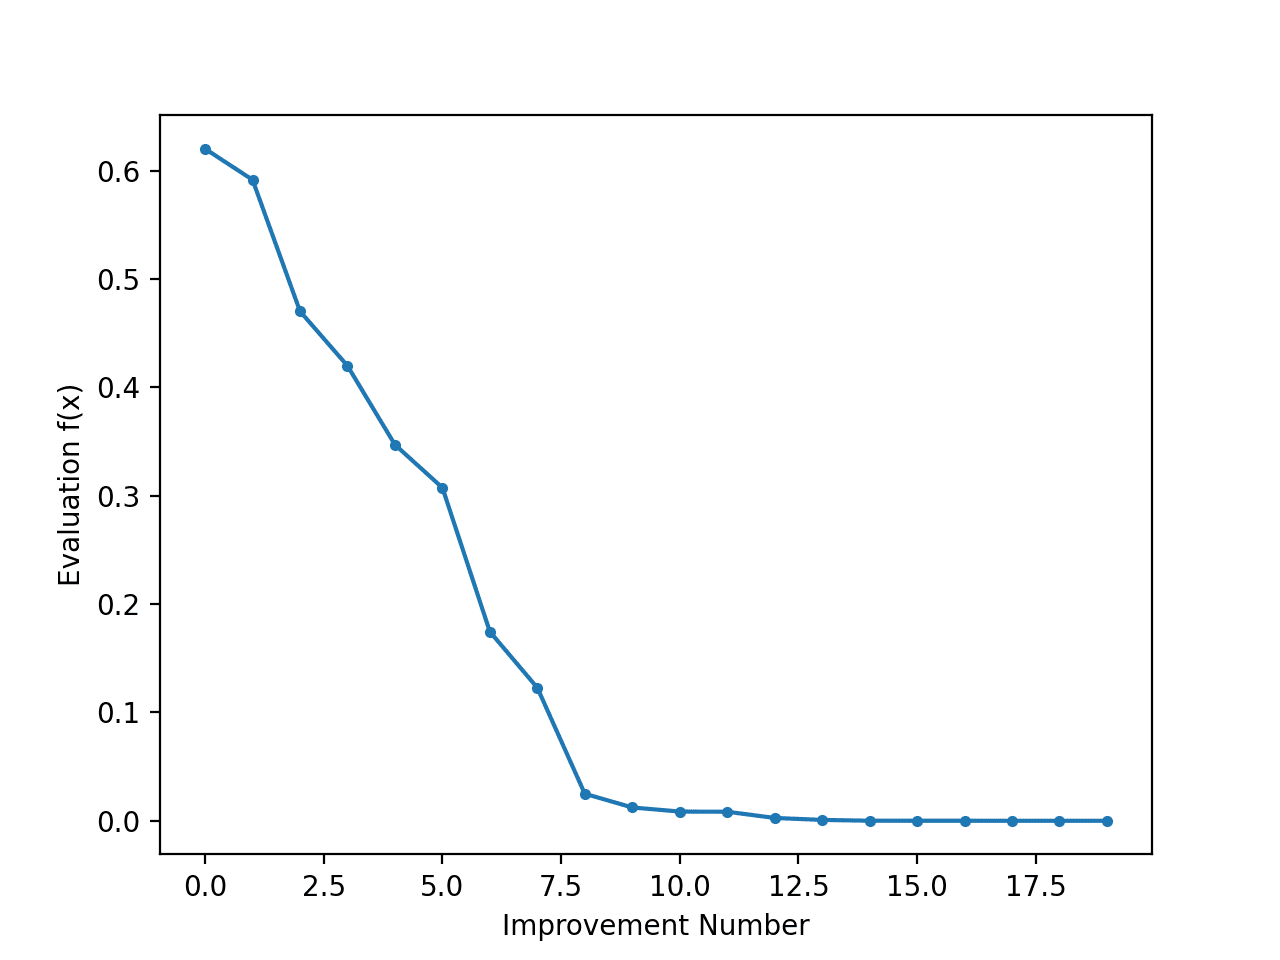 Line Plot of Objective Function Evaluation for Each Improvement During the Simulated Annealing Search